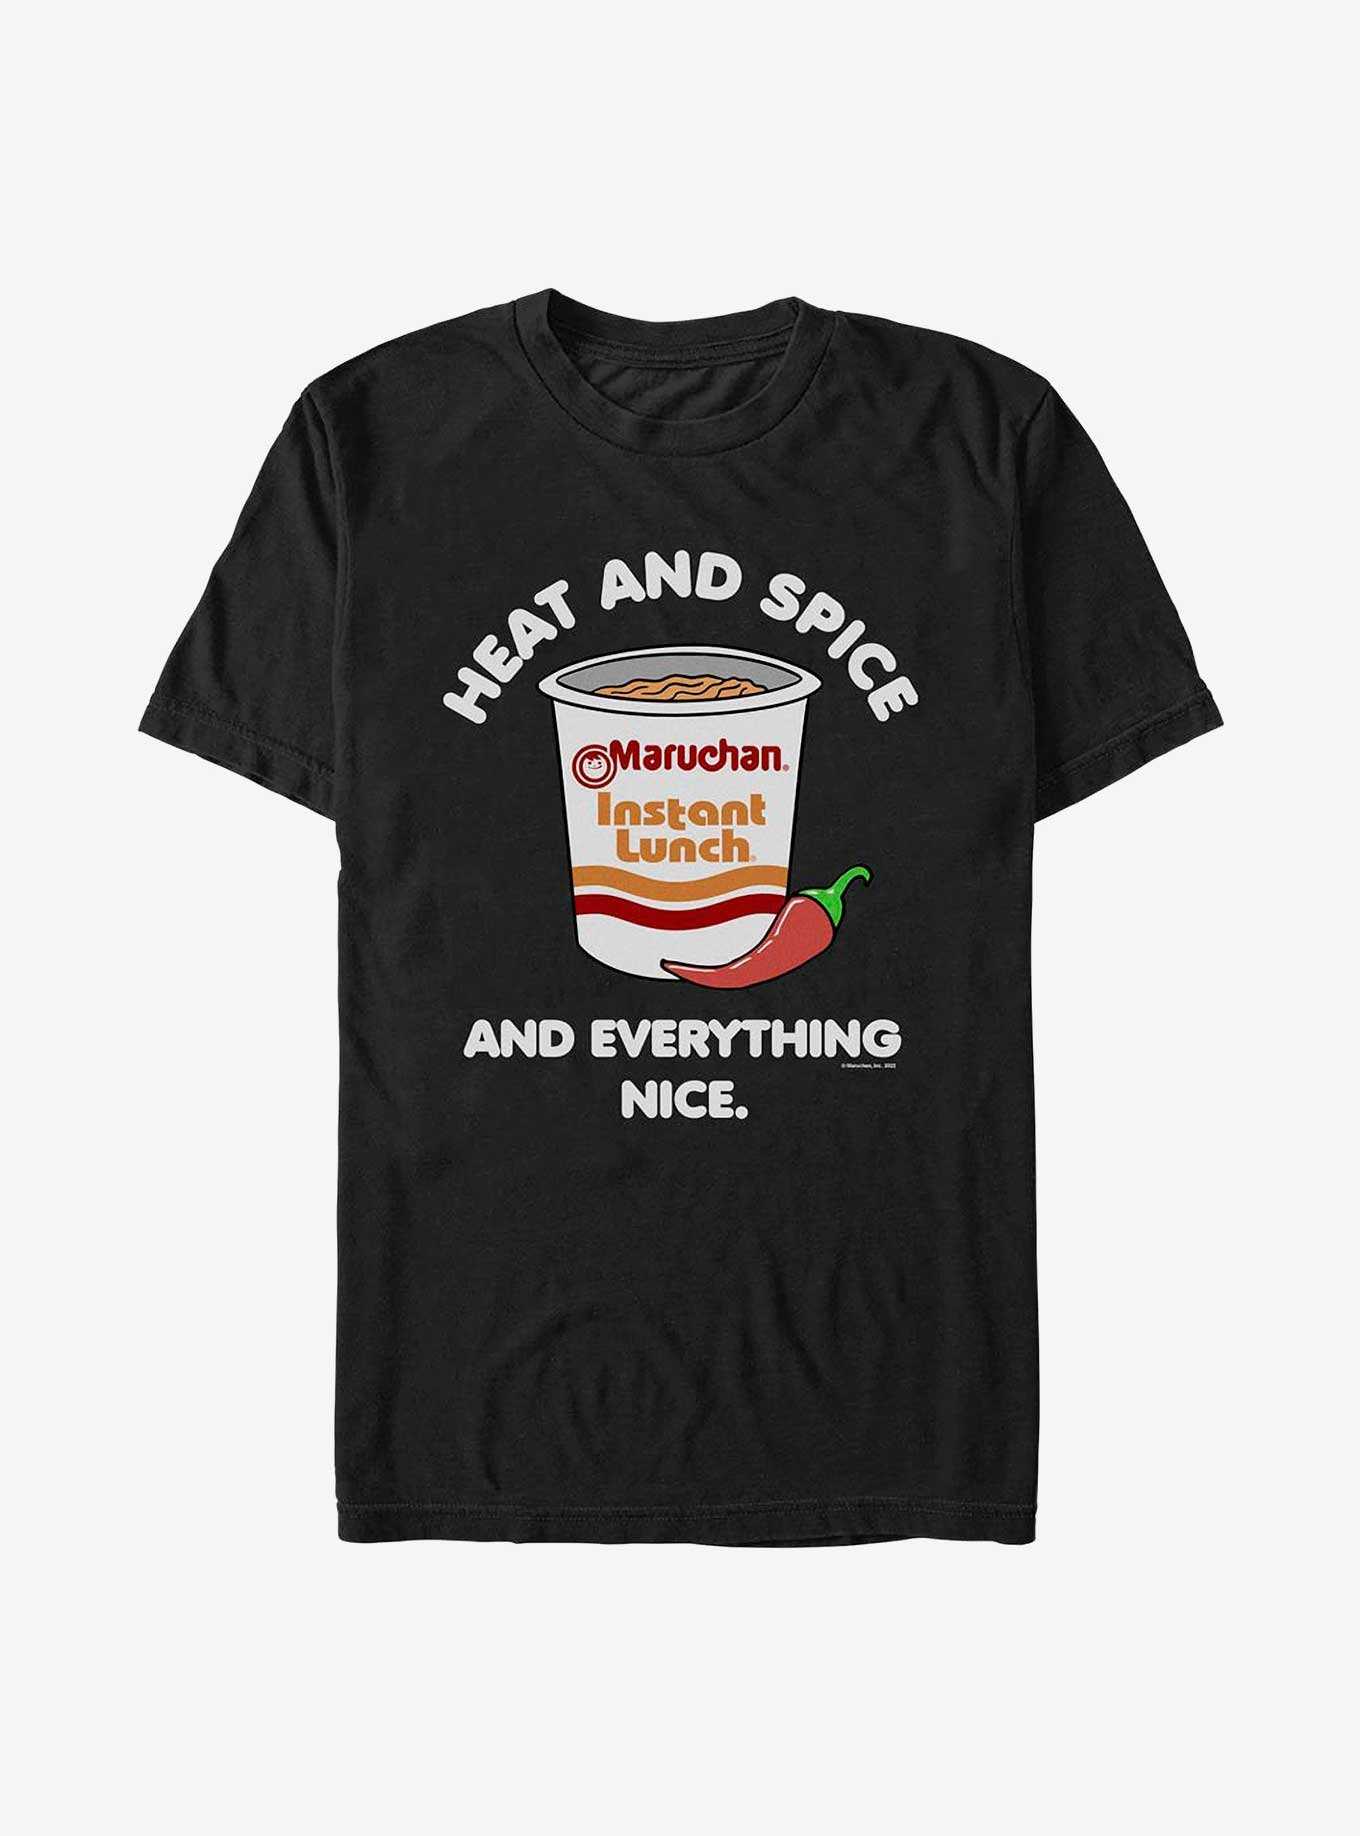 Maruchan Heat And Spice-1 T-Shirt, , hi-res